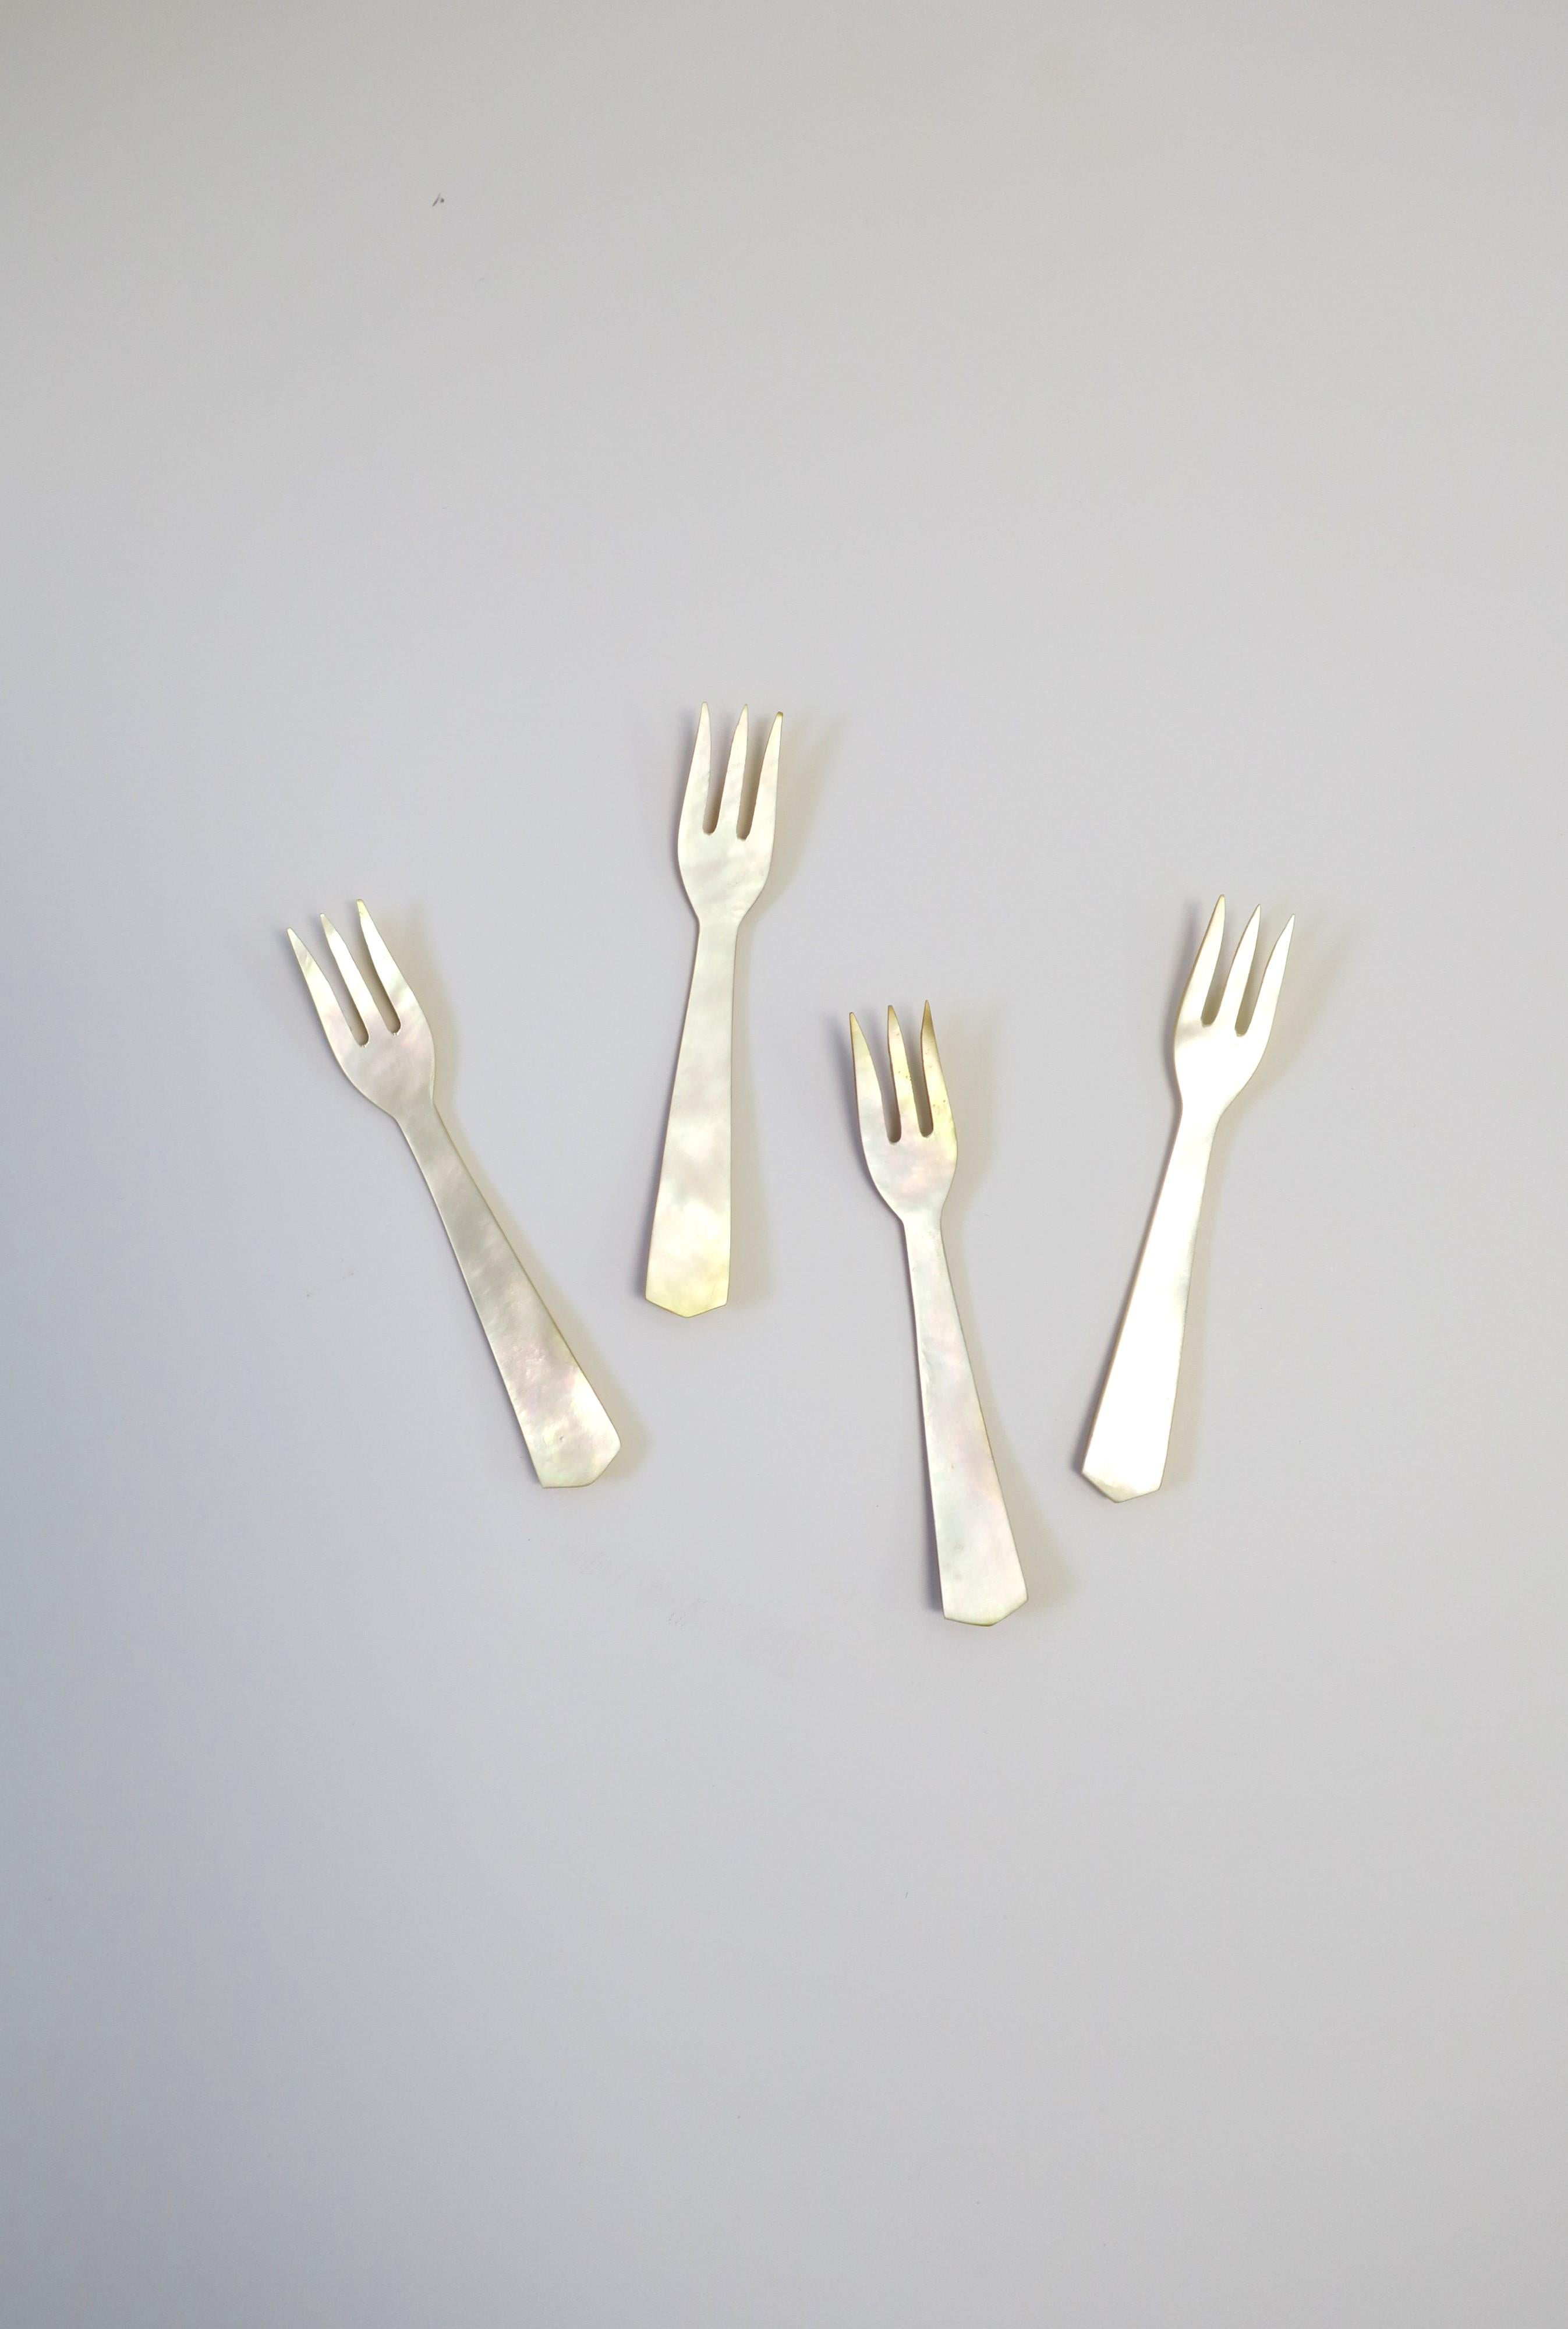 Organic Modern Mother of Pearl Appetizer or Caviar Forks, Set of 4 For Sale